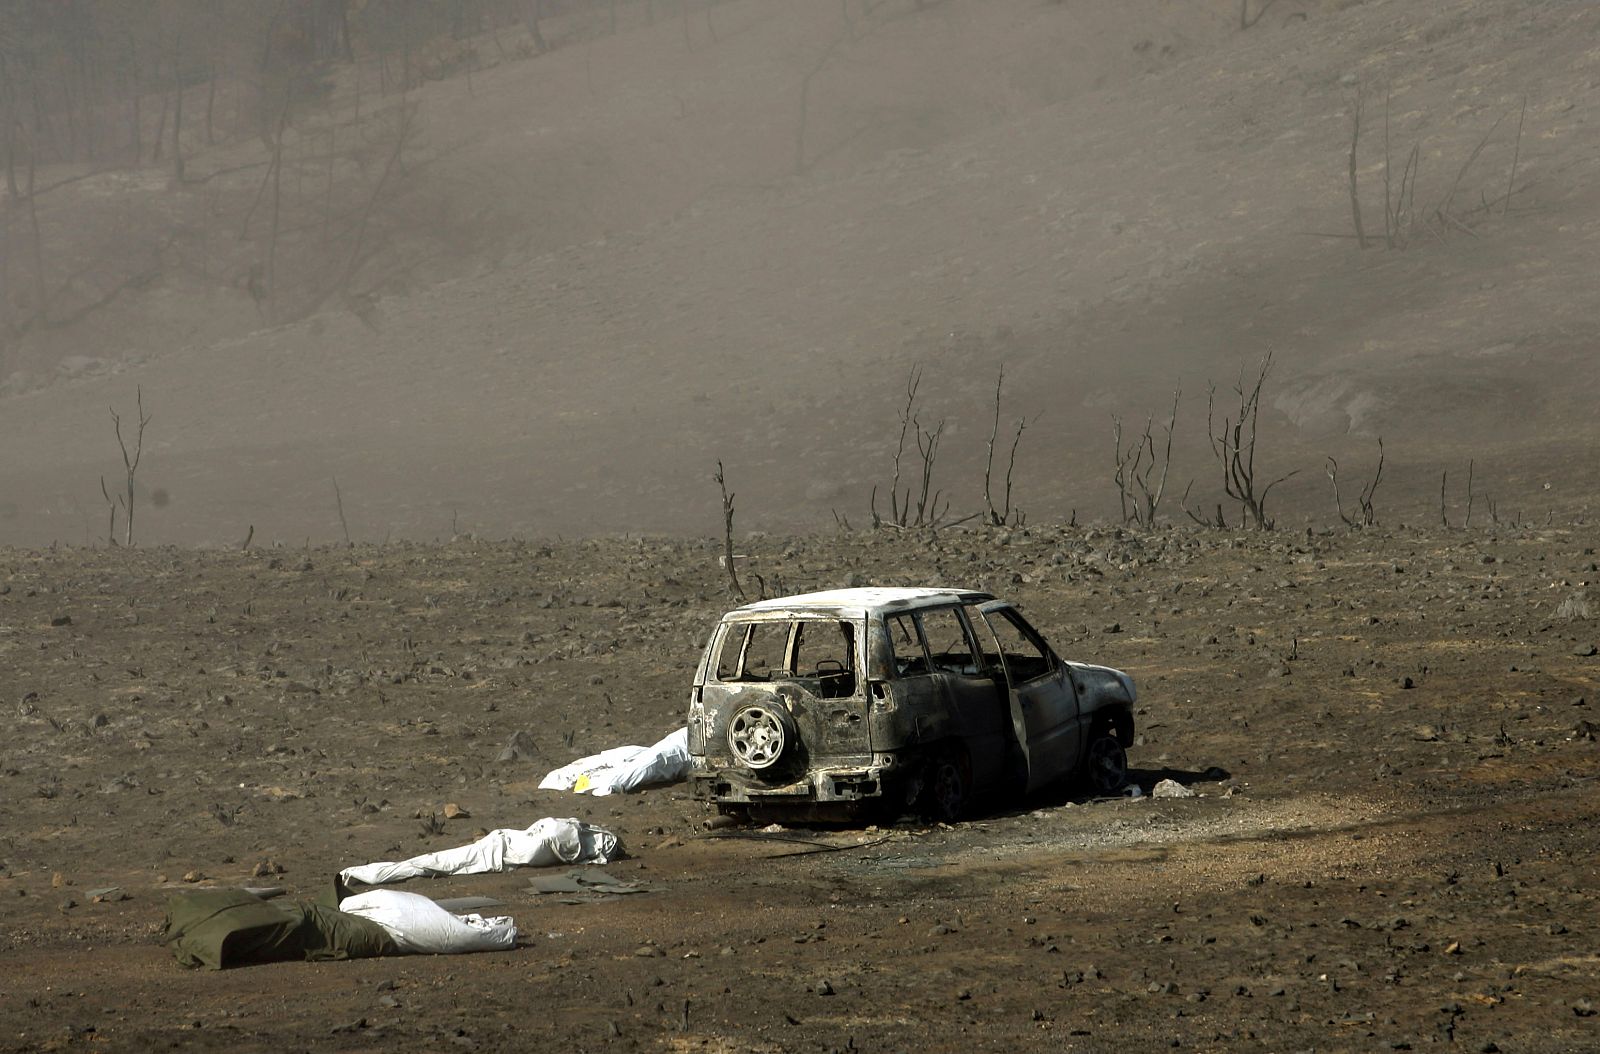 Blackened corpses lay beside charred vehicle after deadly forest fire in central Spain.